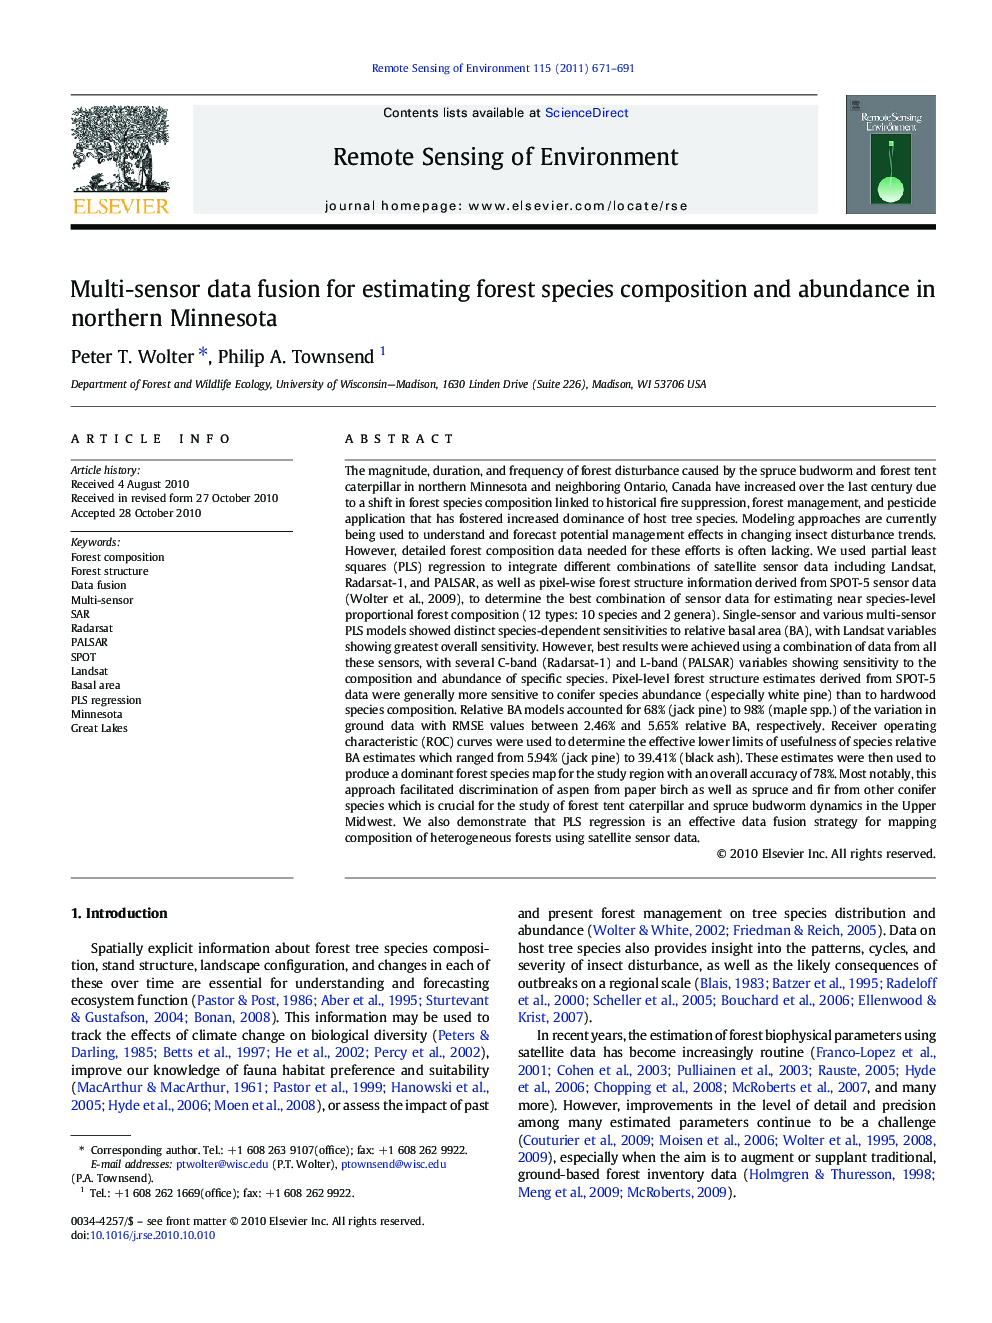 Multi-sensor data fusion for estimating forest species composition and abundance in northern Minnesota